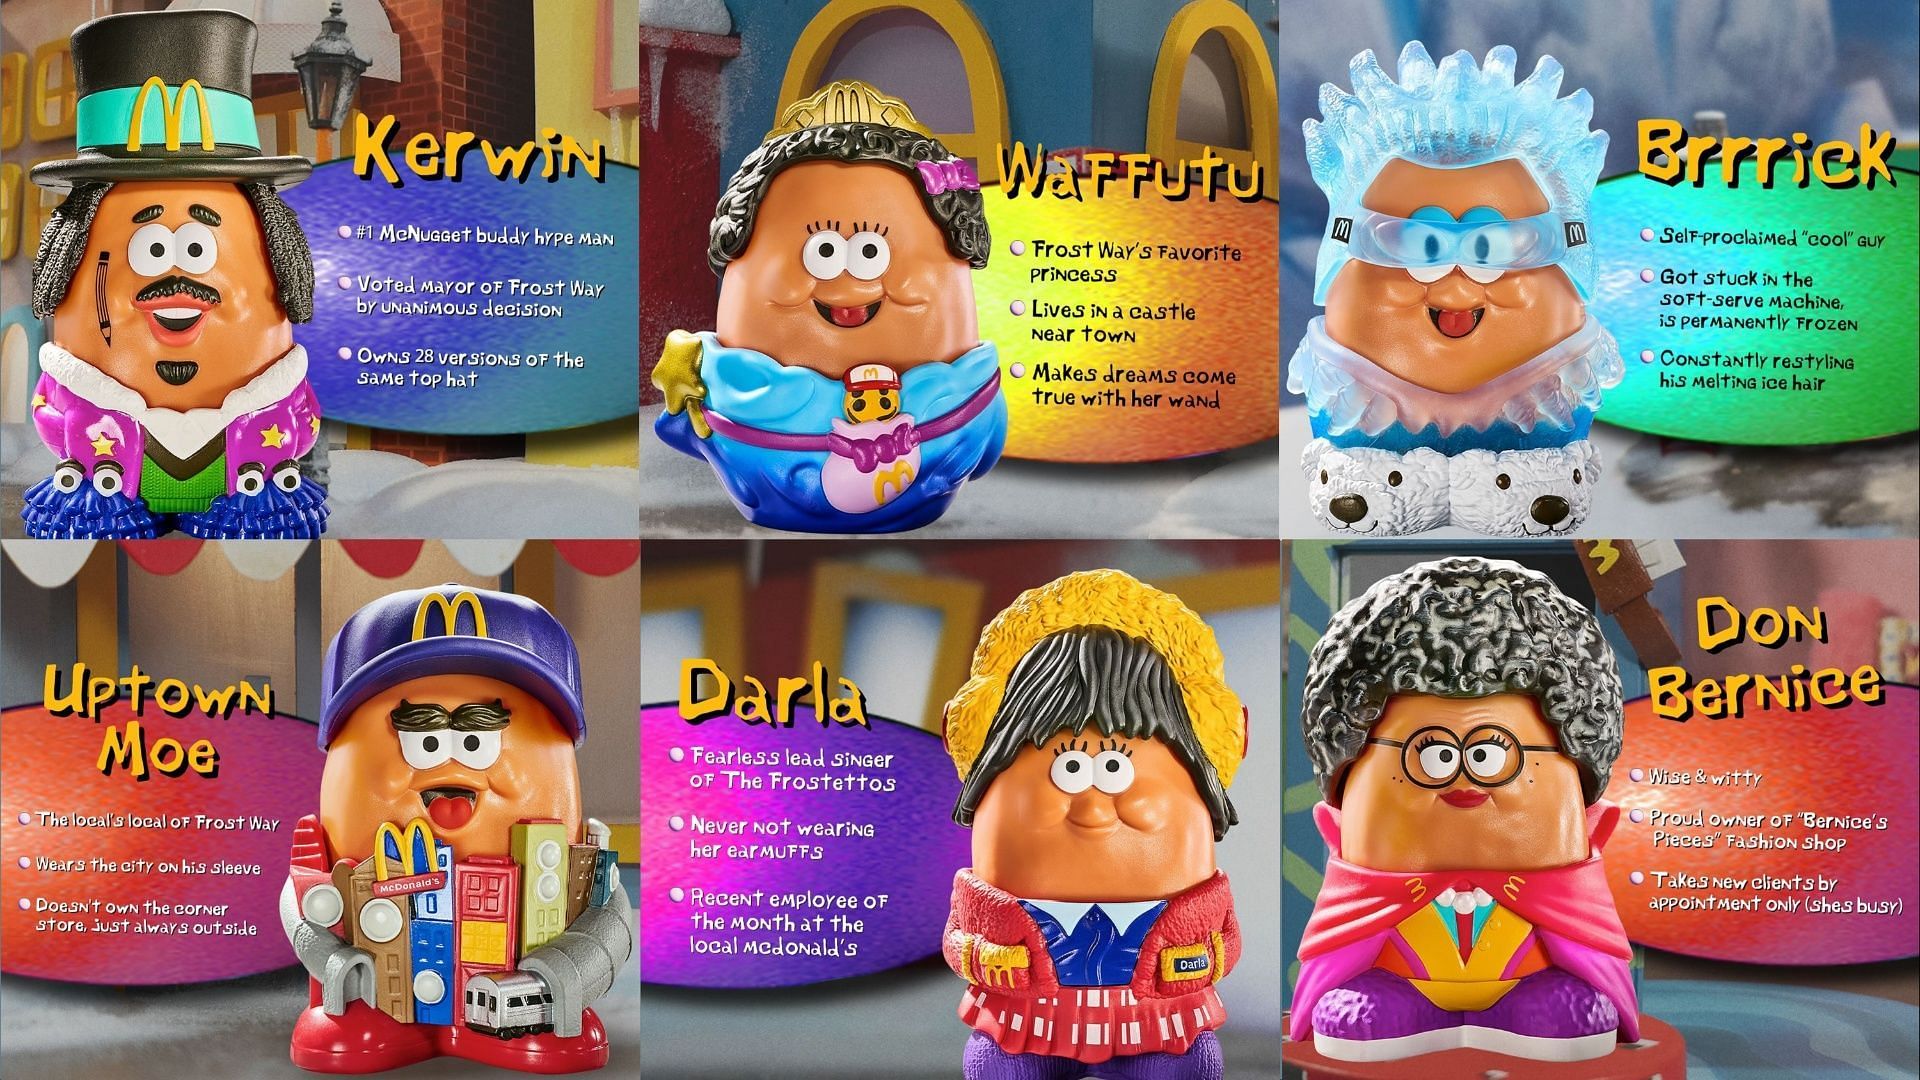 The Adult Happy Meals From McDonald's Have Already Sold Out—And